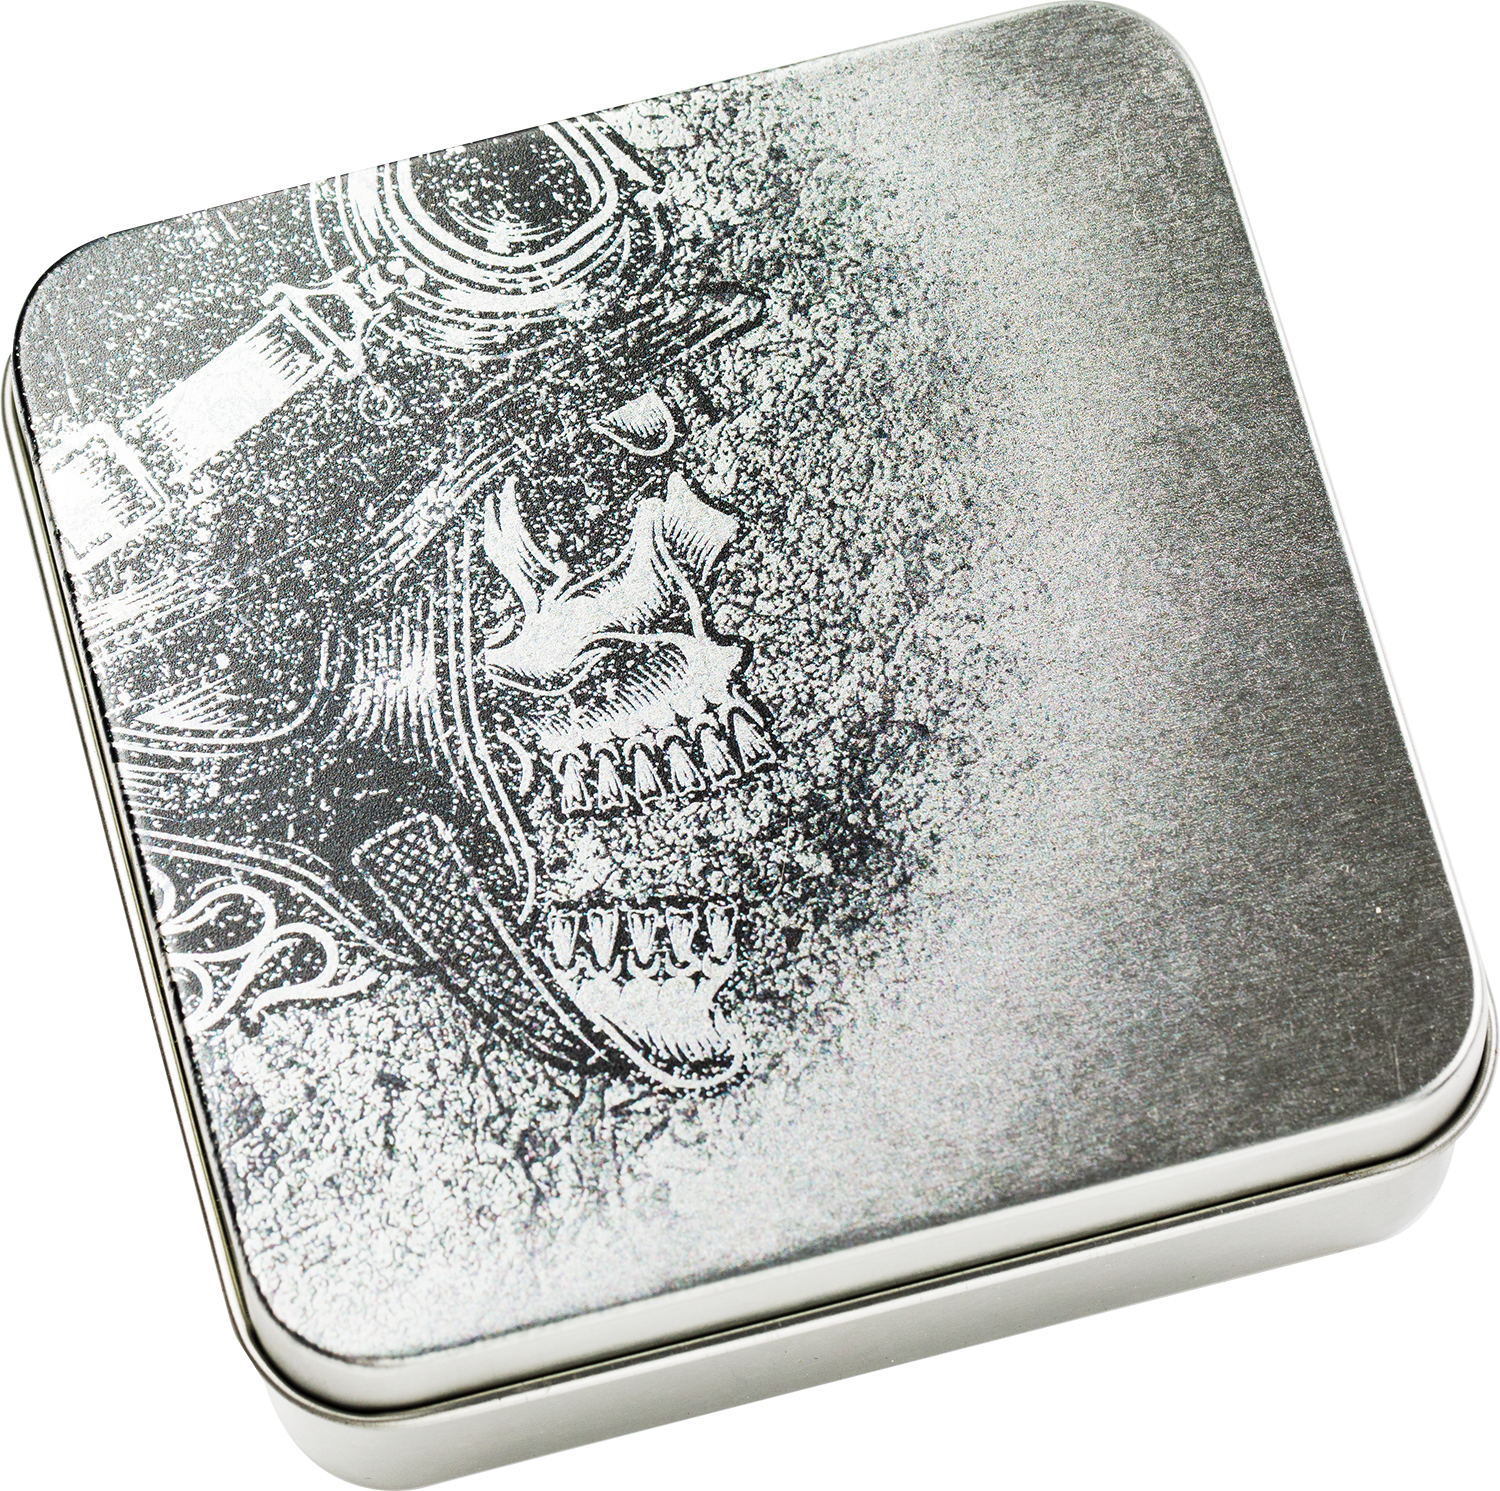 A Metal Box With A Skull Design